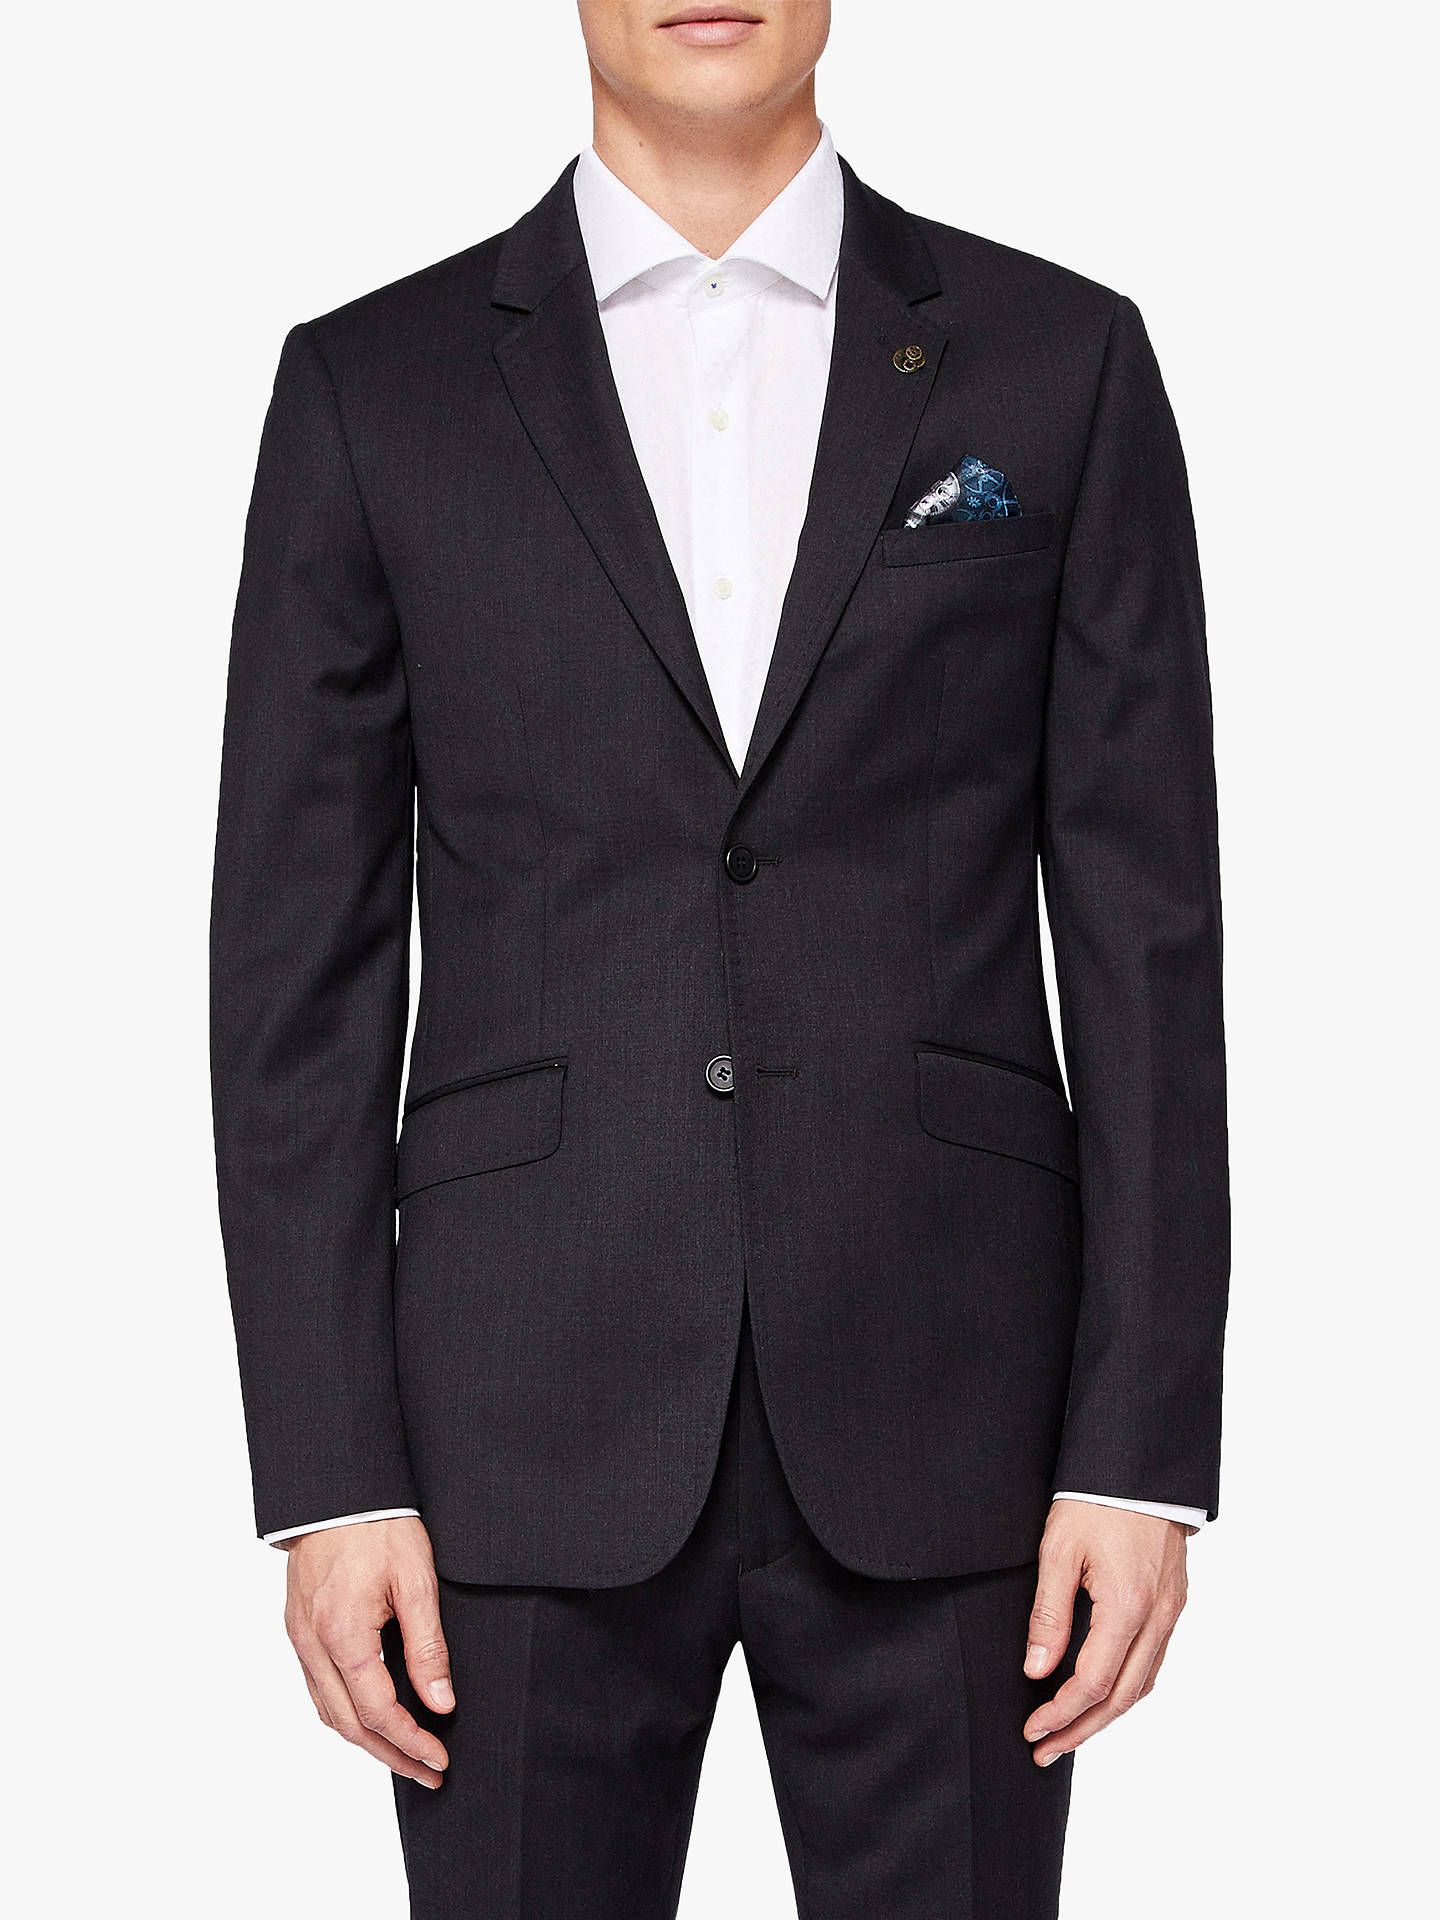 Ted Baker Timzon Wool Tailored Suit Jacket, Black at John Lewis & Partners